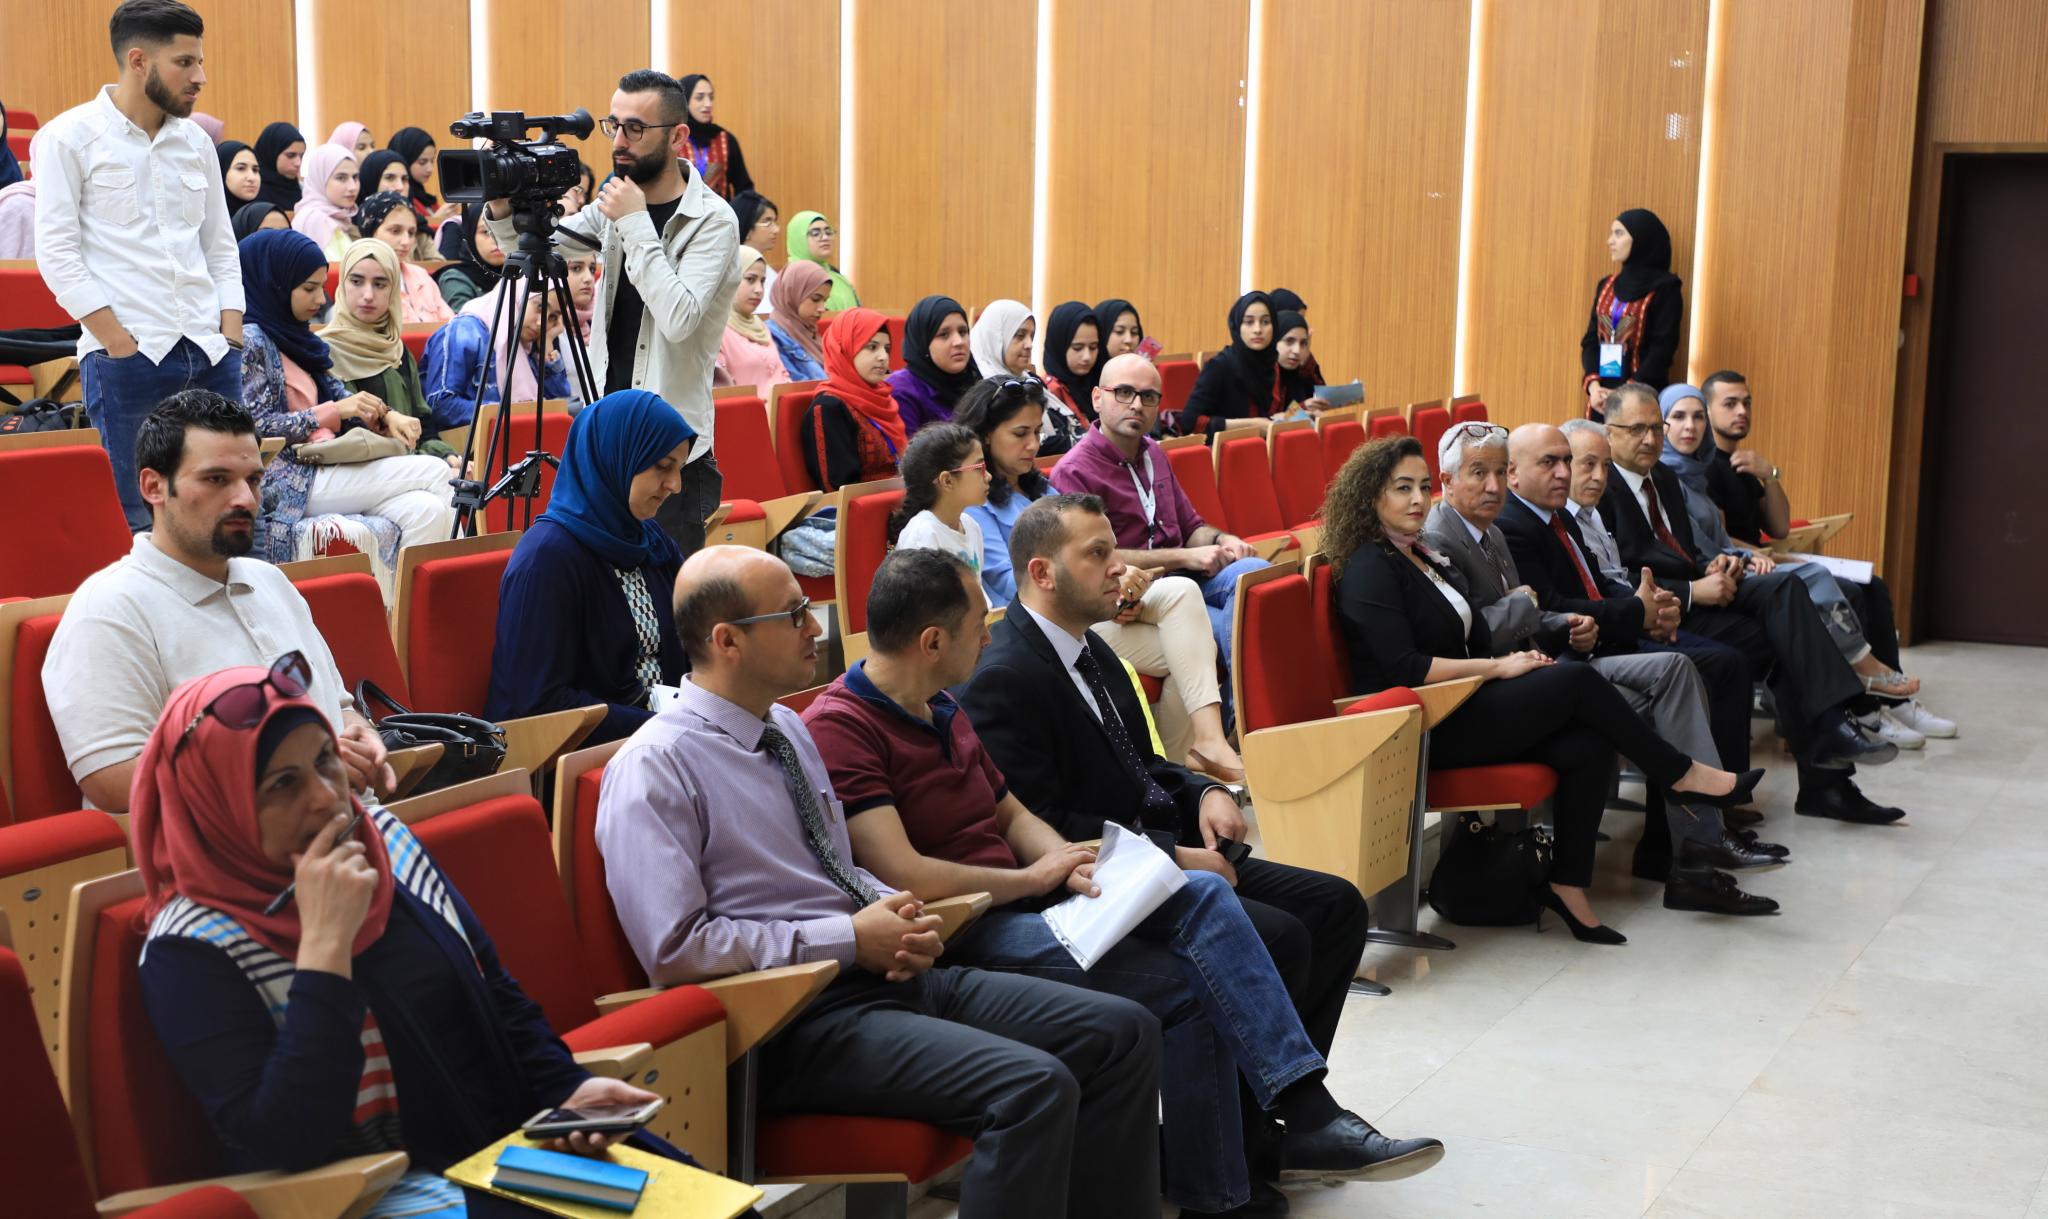 The University Hosts a Ceremony for Finishing the Program “Enhancing ...